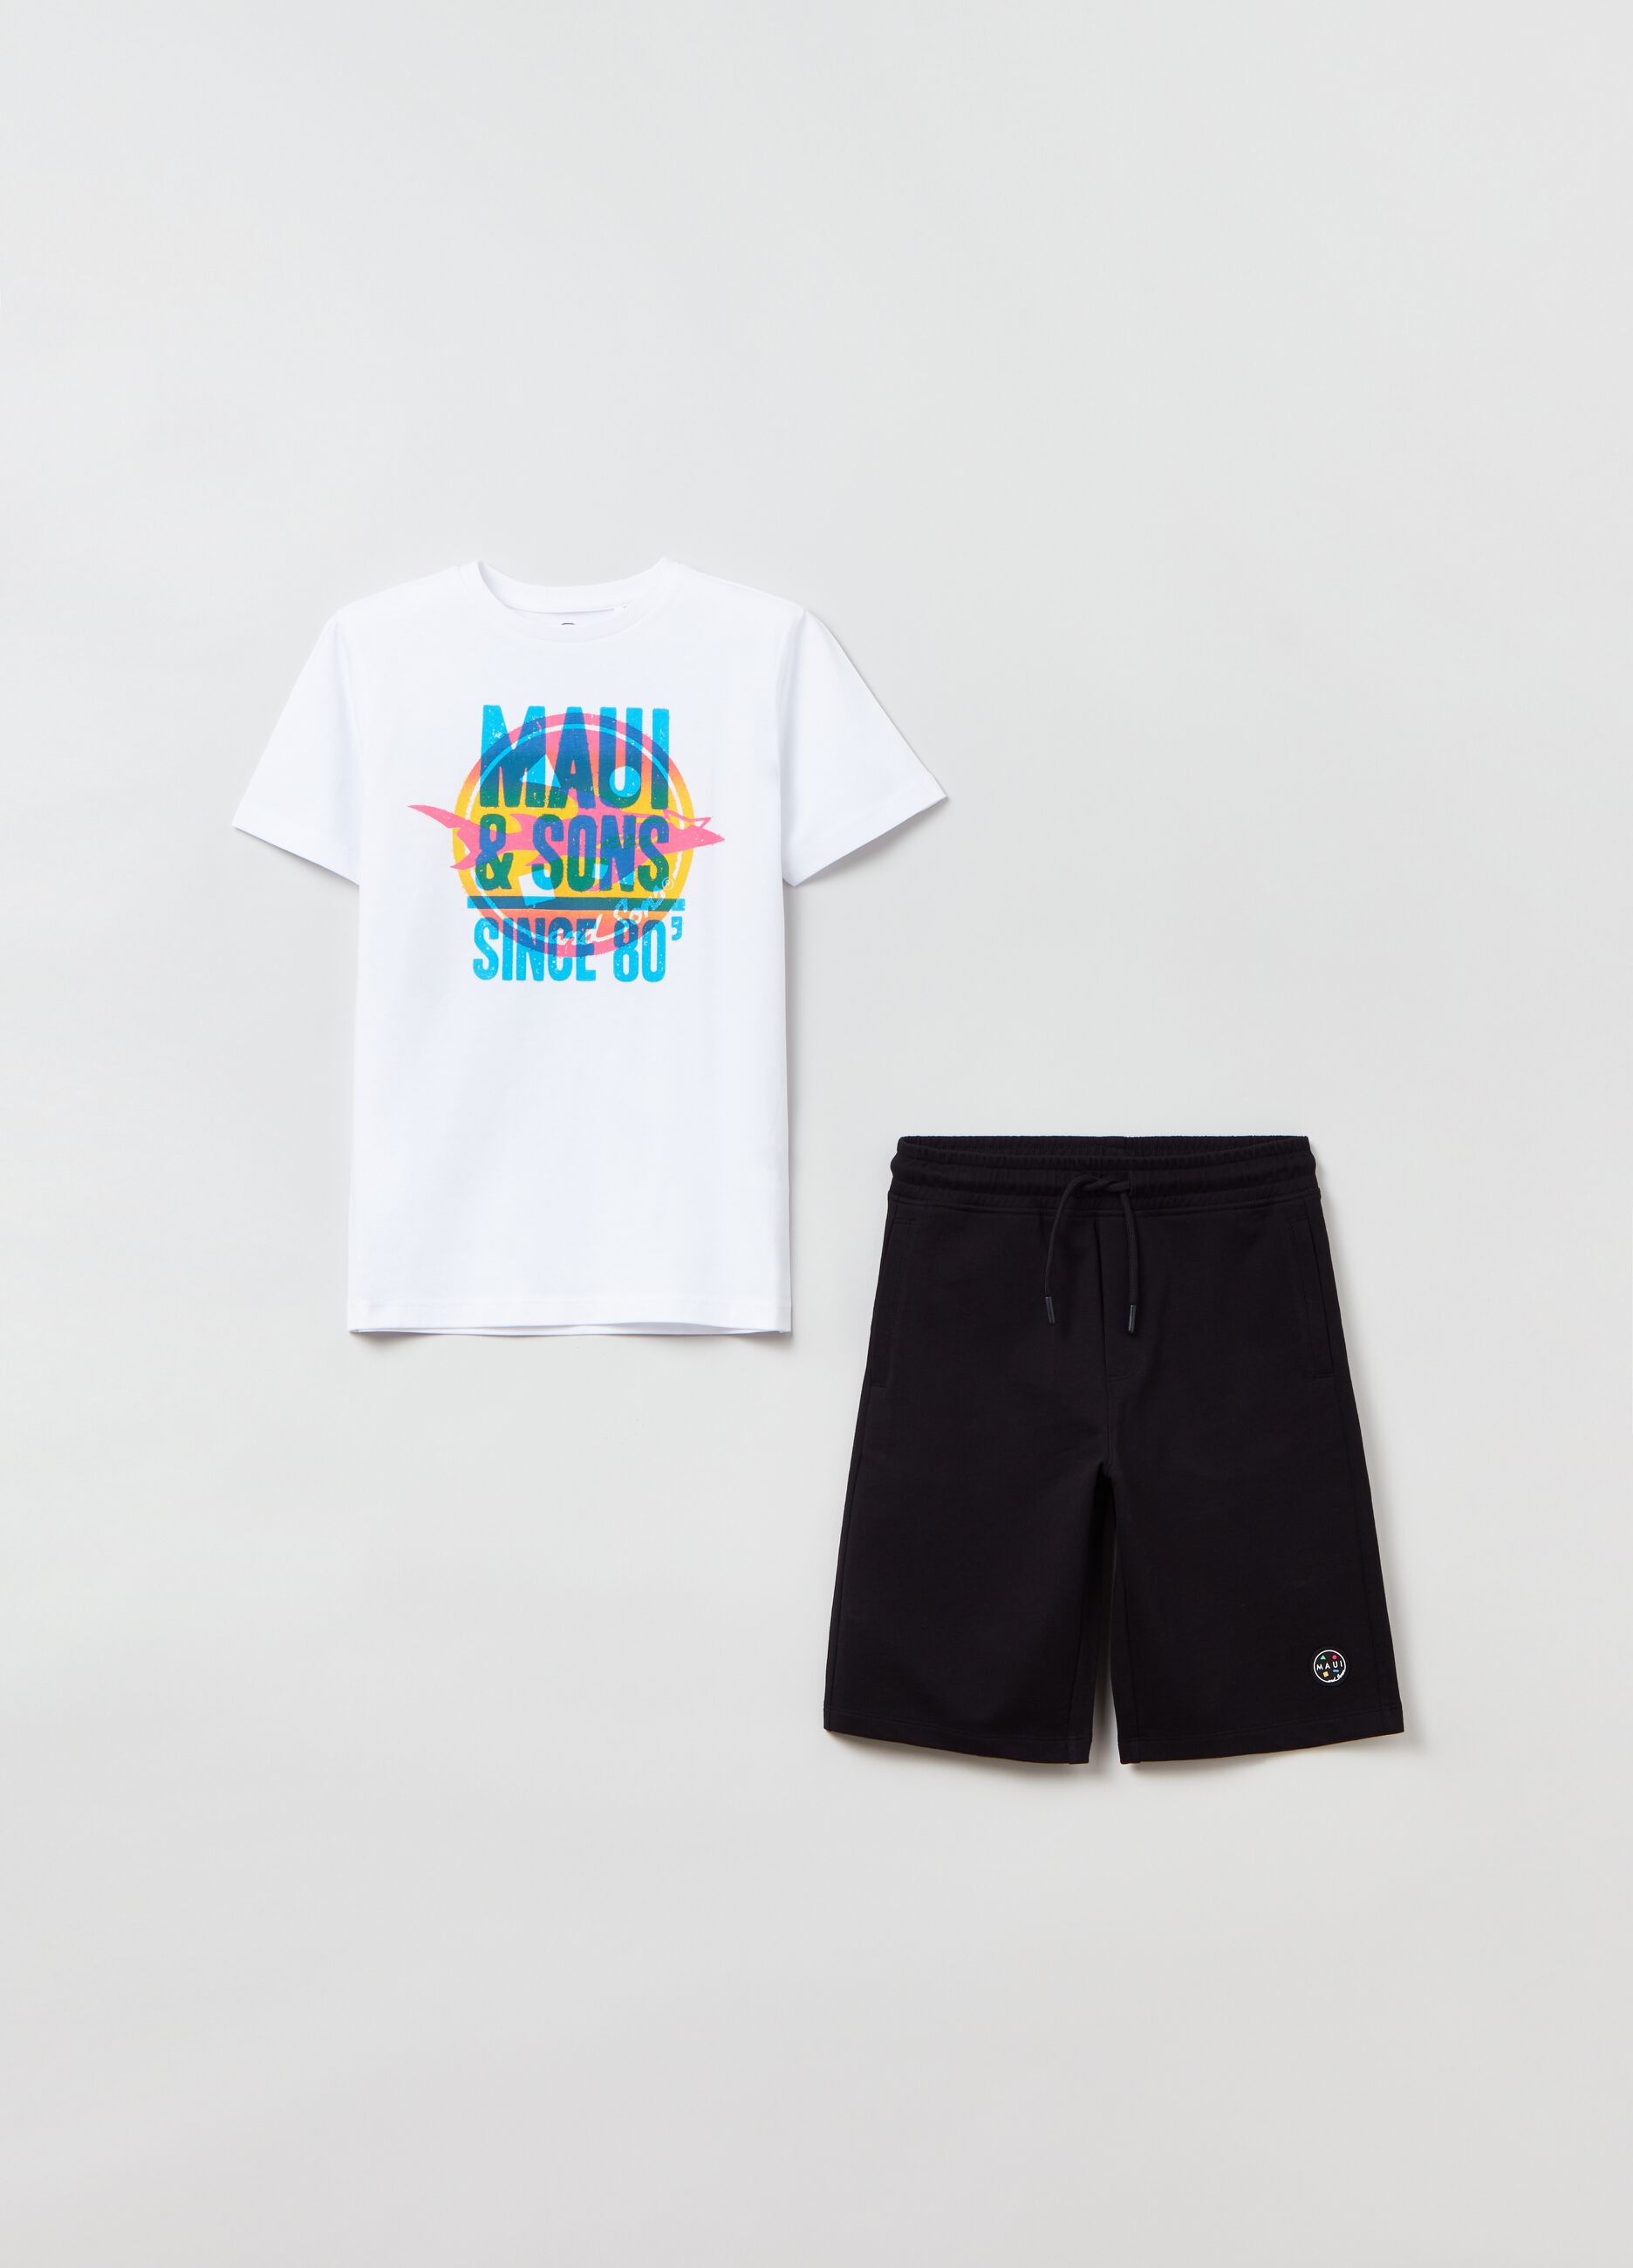 Teen Boy's White/Black Cotton jogging set by Maui and Sons | OVS